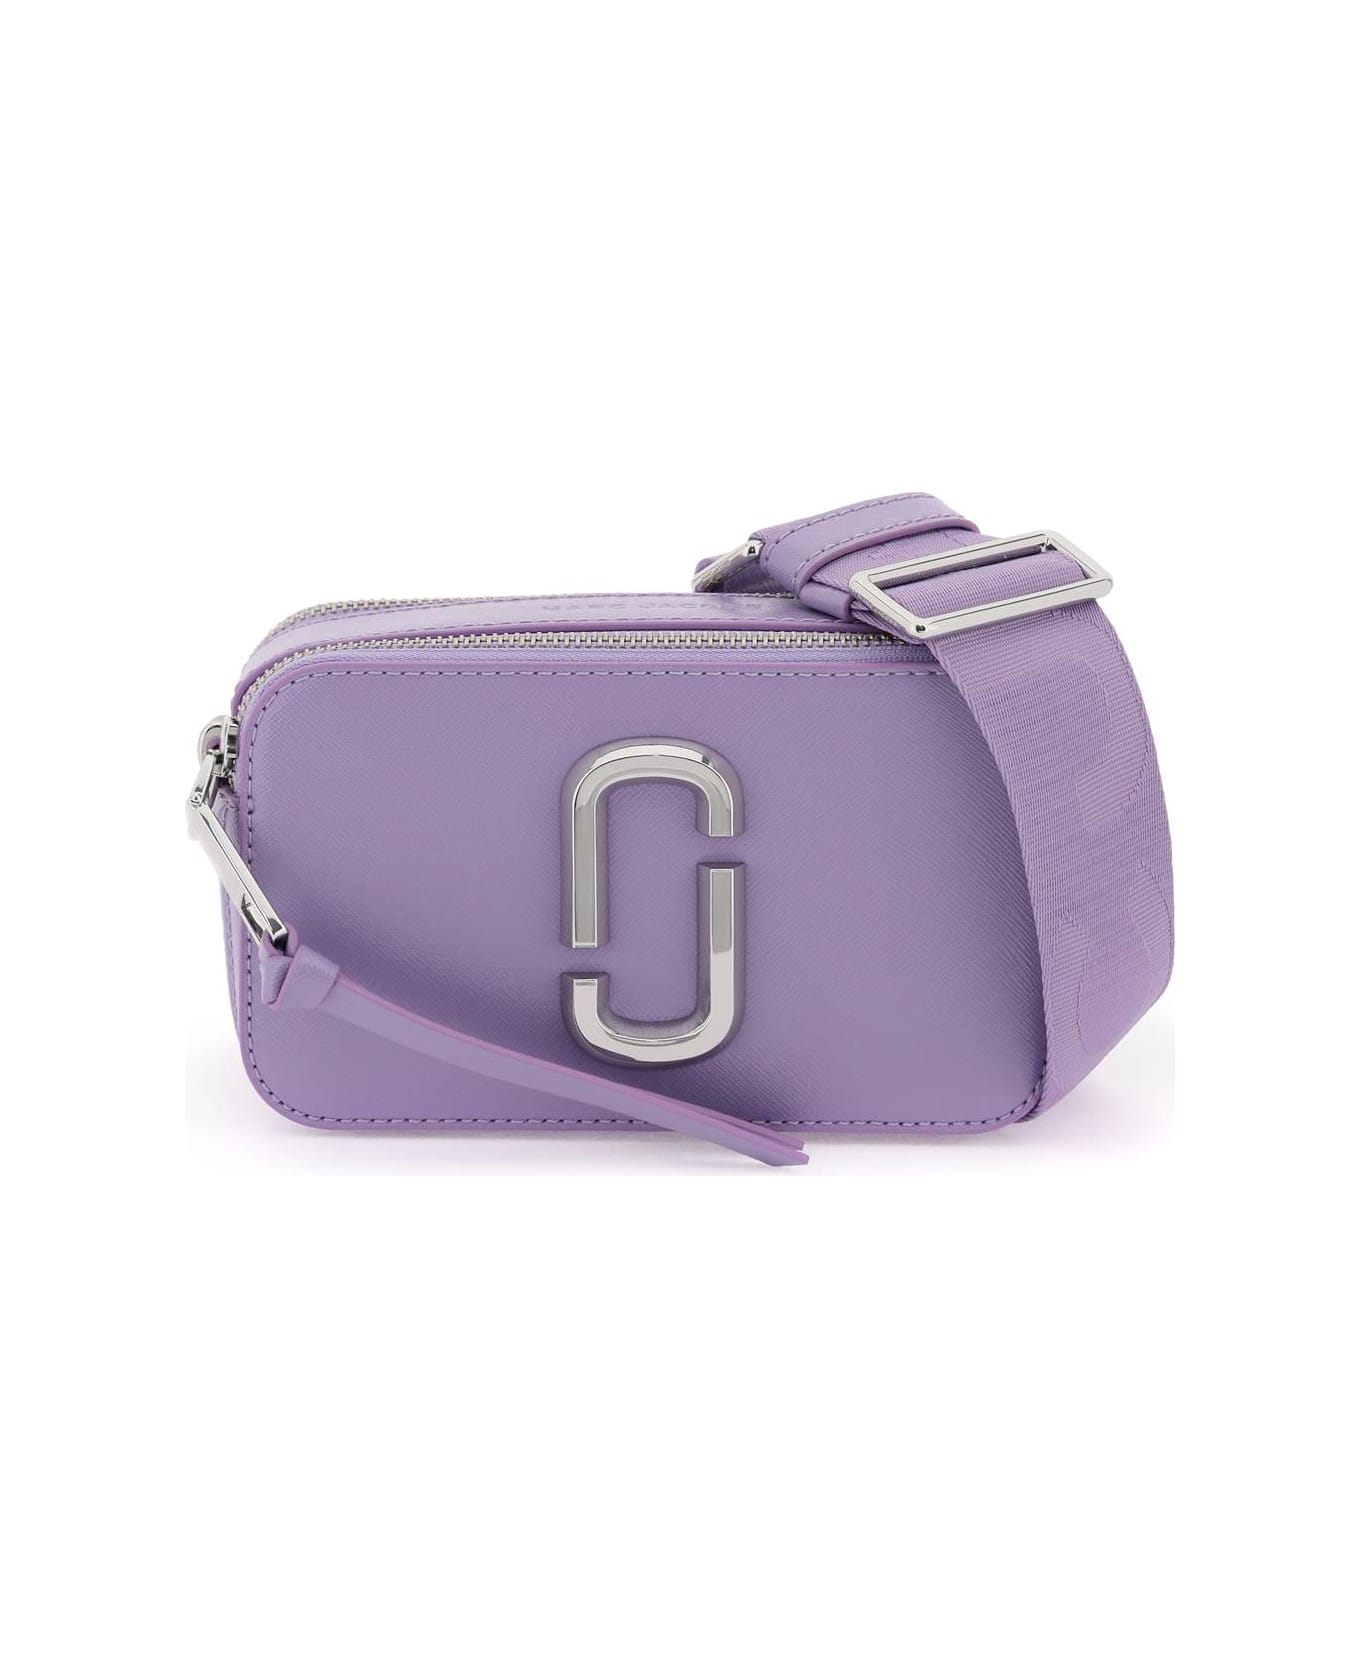 Marc Jacobs The Utility Snapshot Leather Camera Bag - Violet